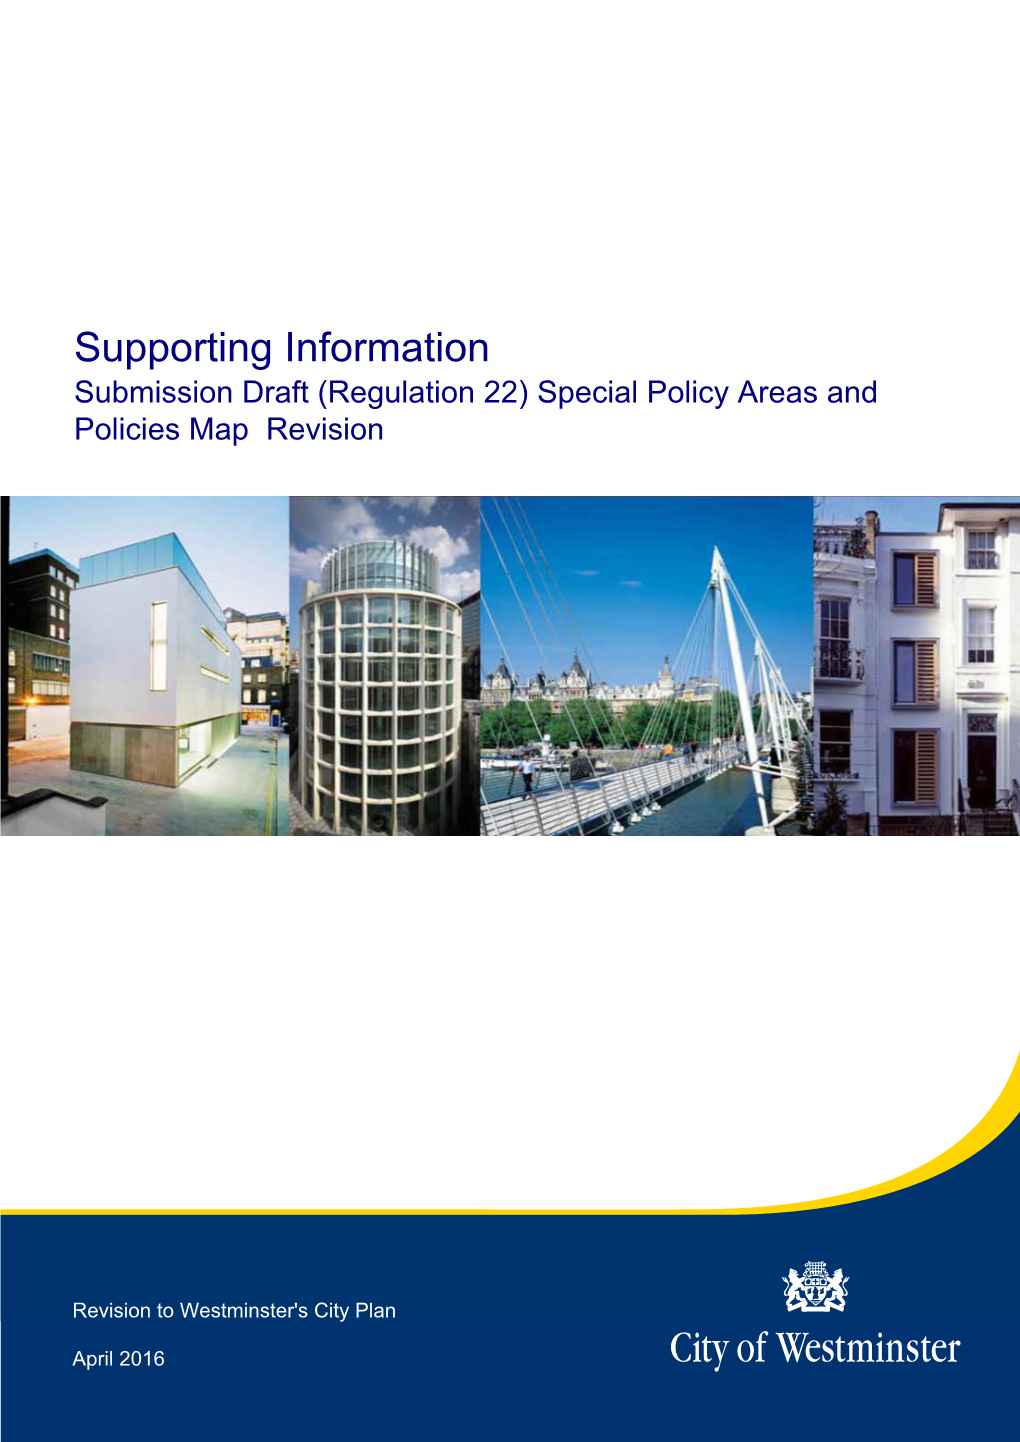 Supporting Information Submission Draft (Regulation 22) Special Policy Areas and Policies Map Revision